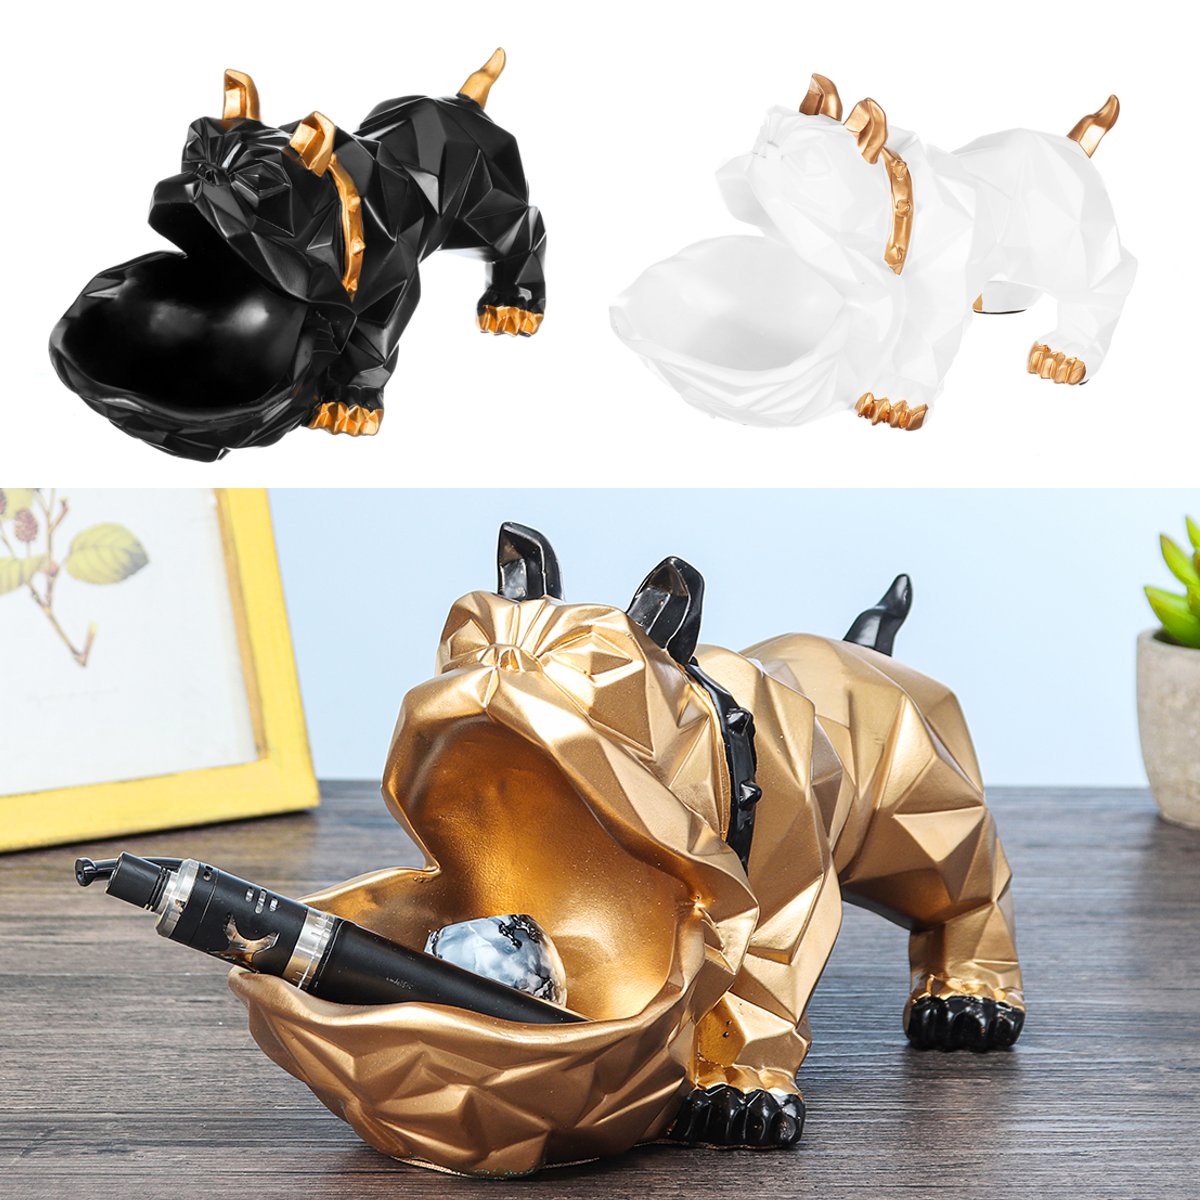 Cute-Dog-Figurines-Statue-Resin-Sculpture-Home-Storage-Decorations-1576063-9